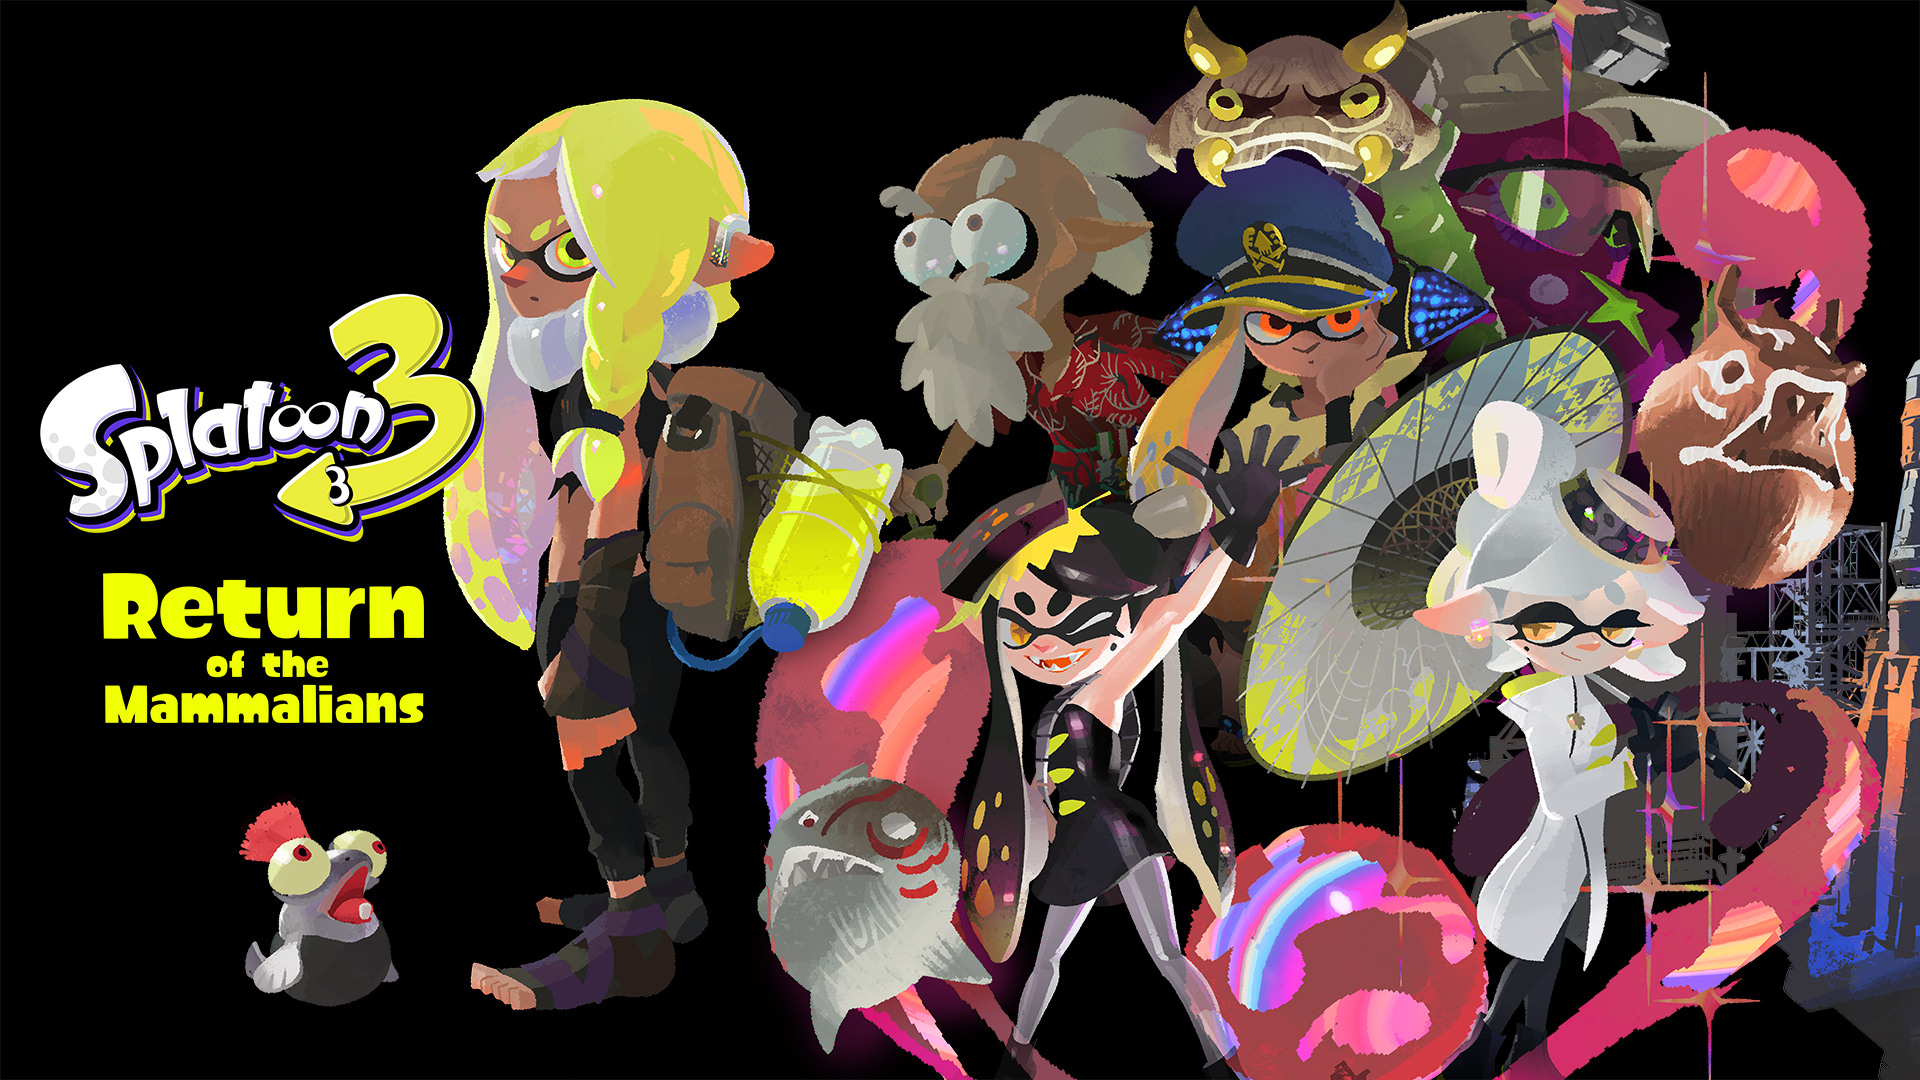 New Splatoon 3 details from the Squid Research Lab - Nintendo - Official Site